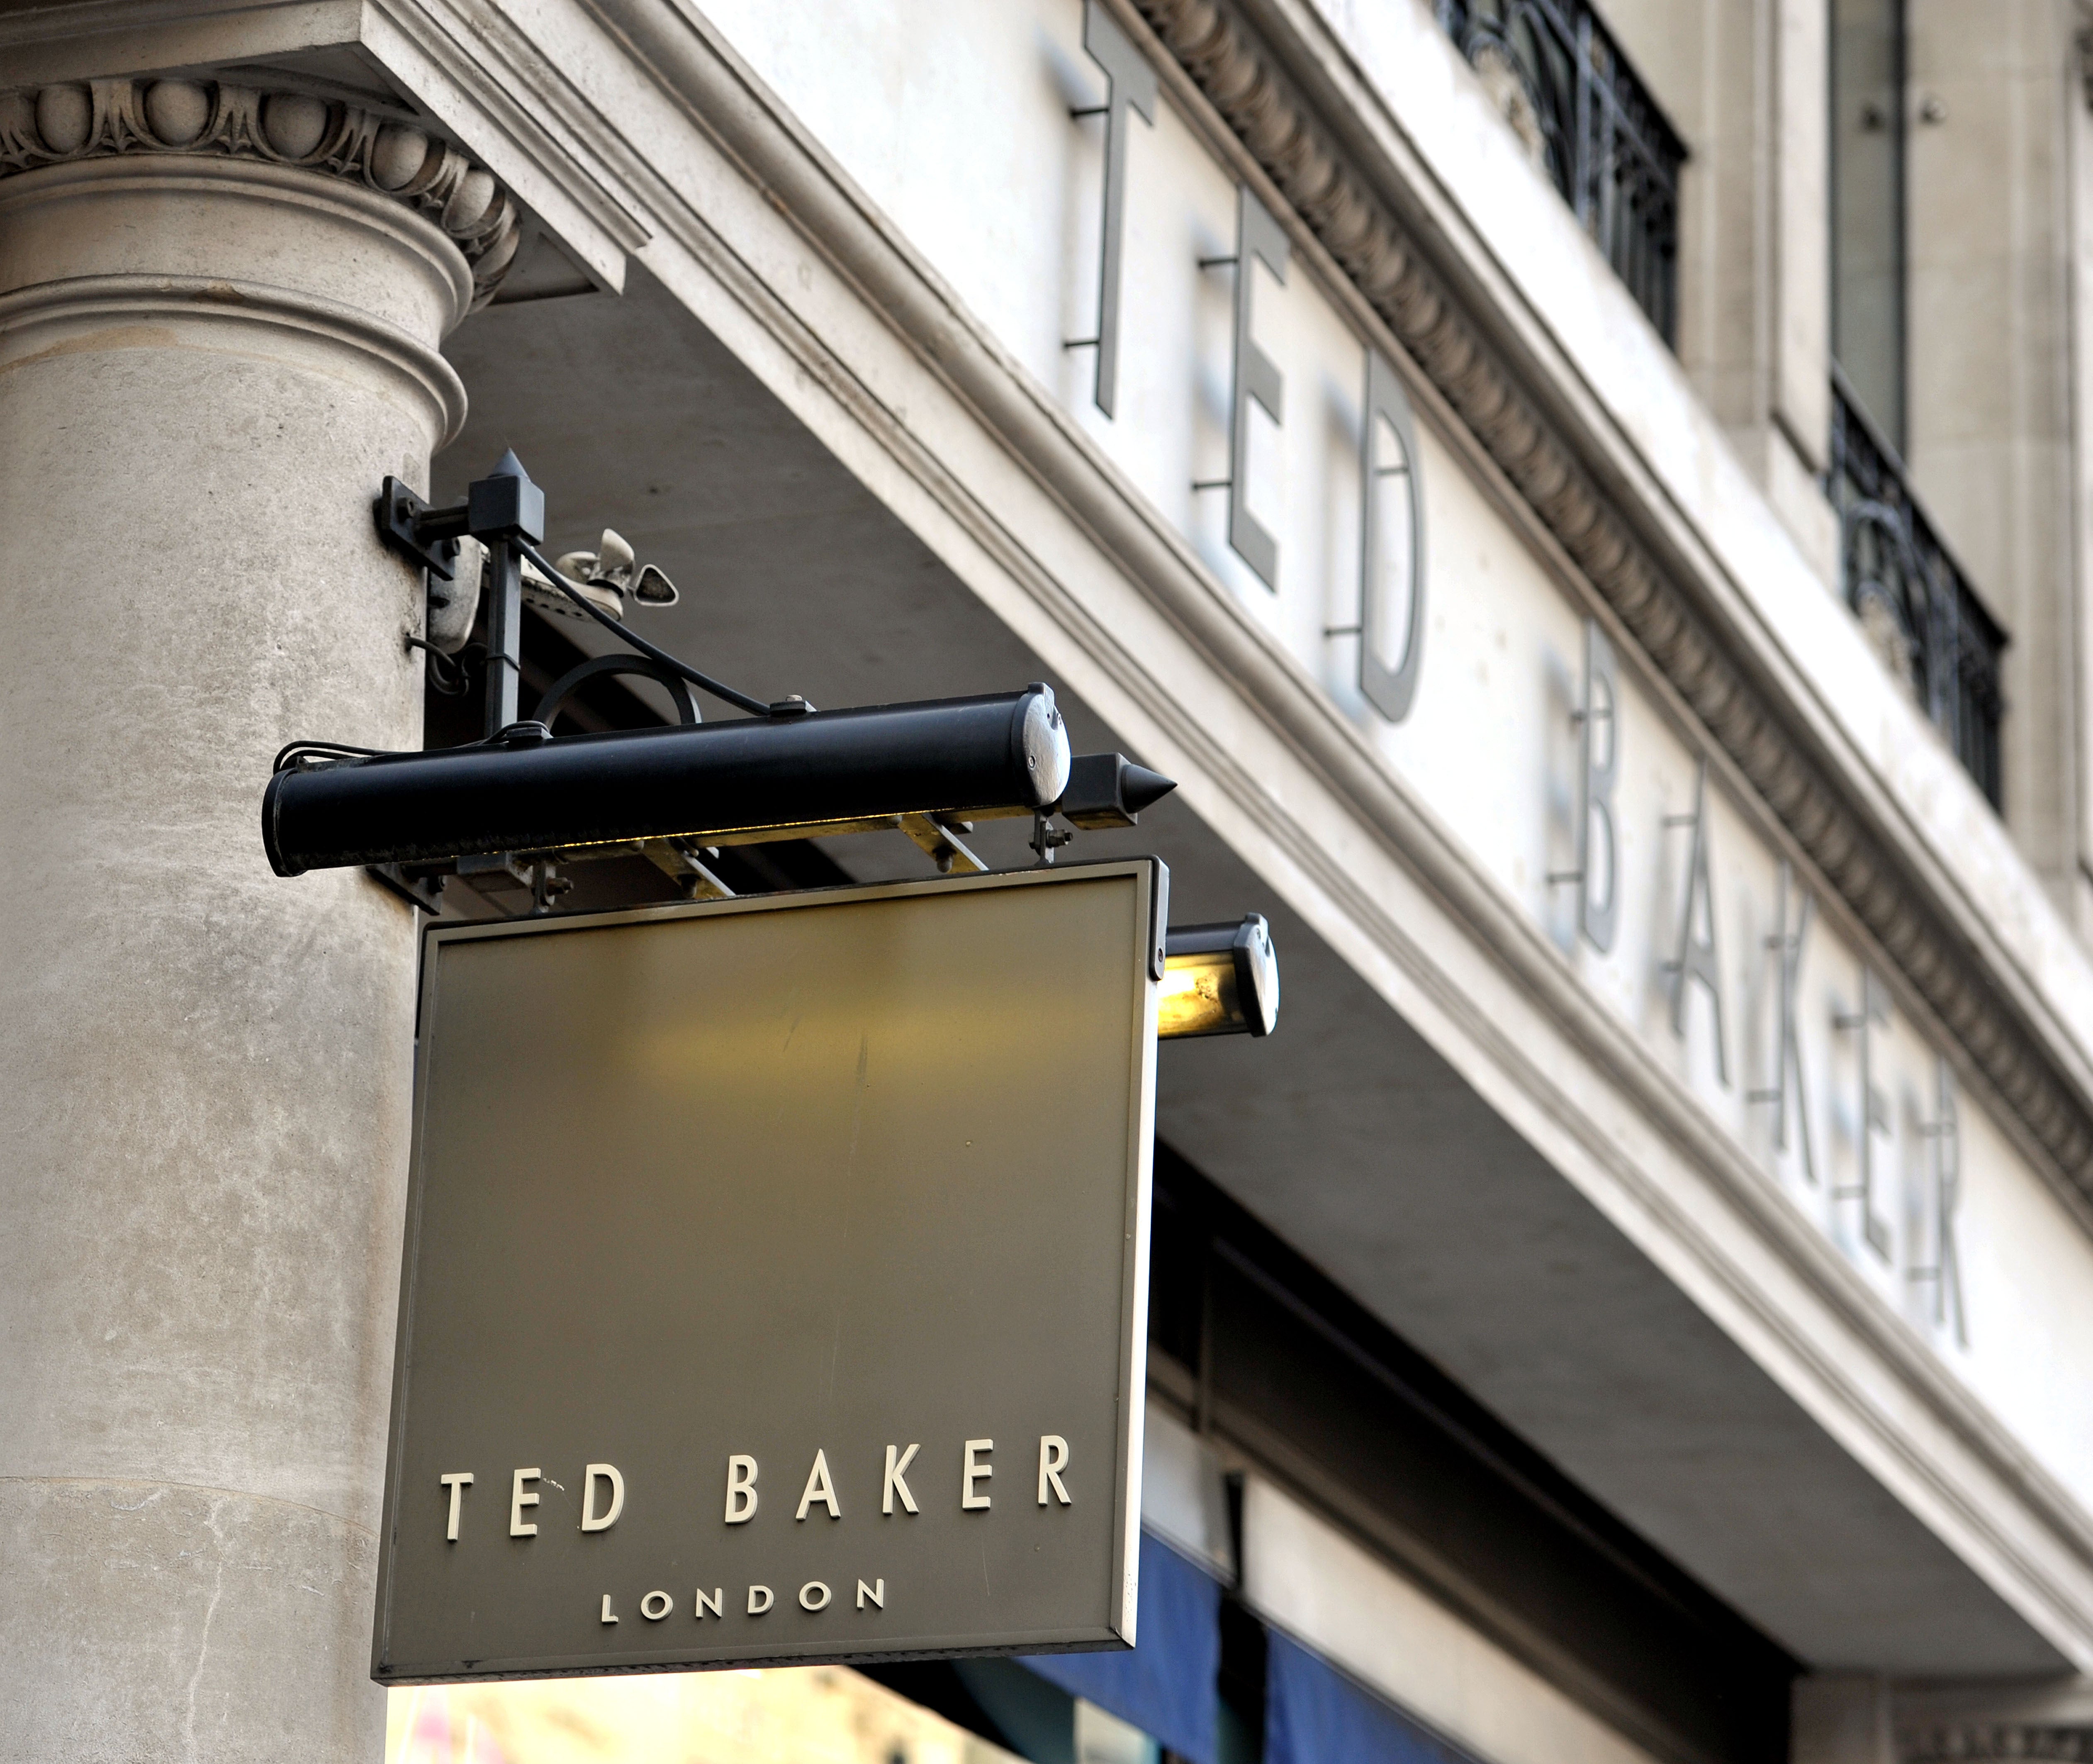 Ted Baker sales rose following the end of Covid-19 restrictions (Nick Ansell/PA)